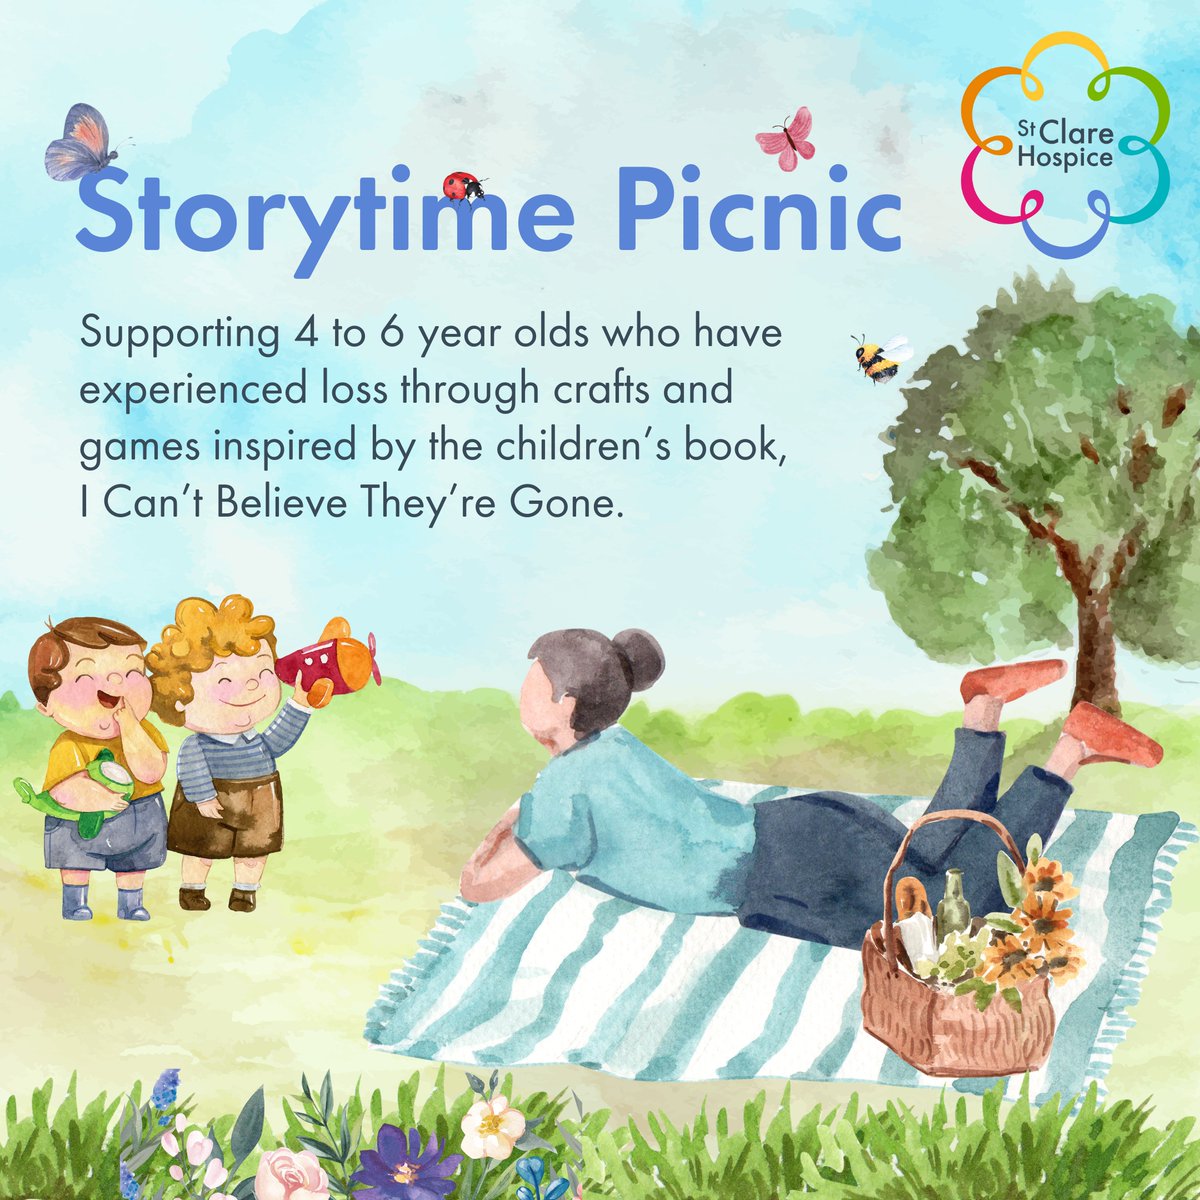 St Clare Storytime Picnic 📖 🐭 | Thu 4th Apr | 10am - 1pm We're inviting bereaved 4-6 year olds to our FREE children's bereavement event inspired by the children's book 'I Can't Believe They're Gone.' Registration is key, spaces limited. To book visit: bit.ly/49HkRQa